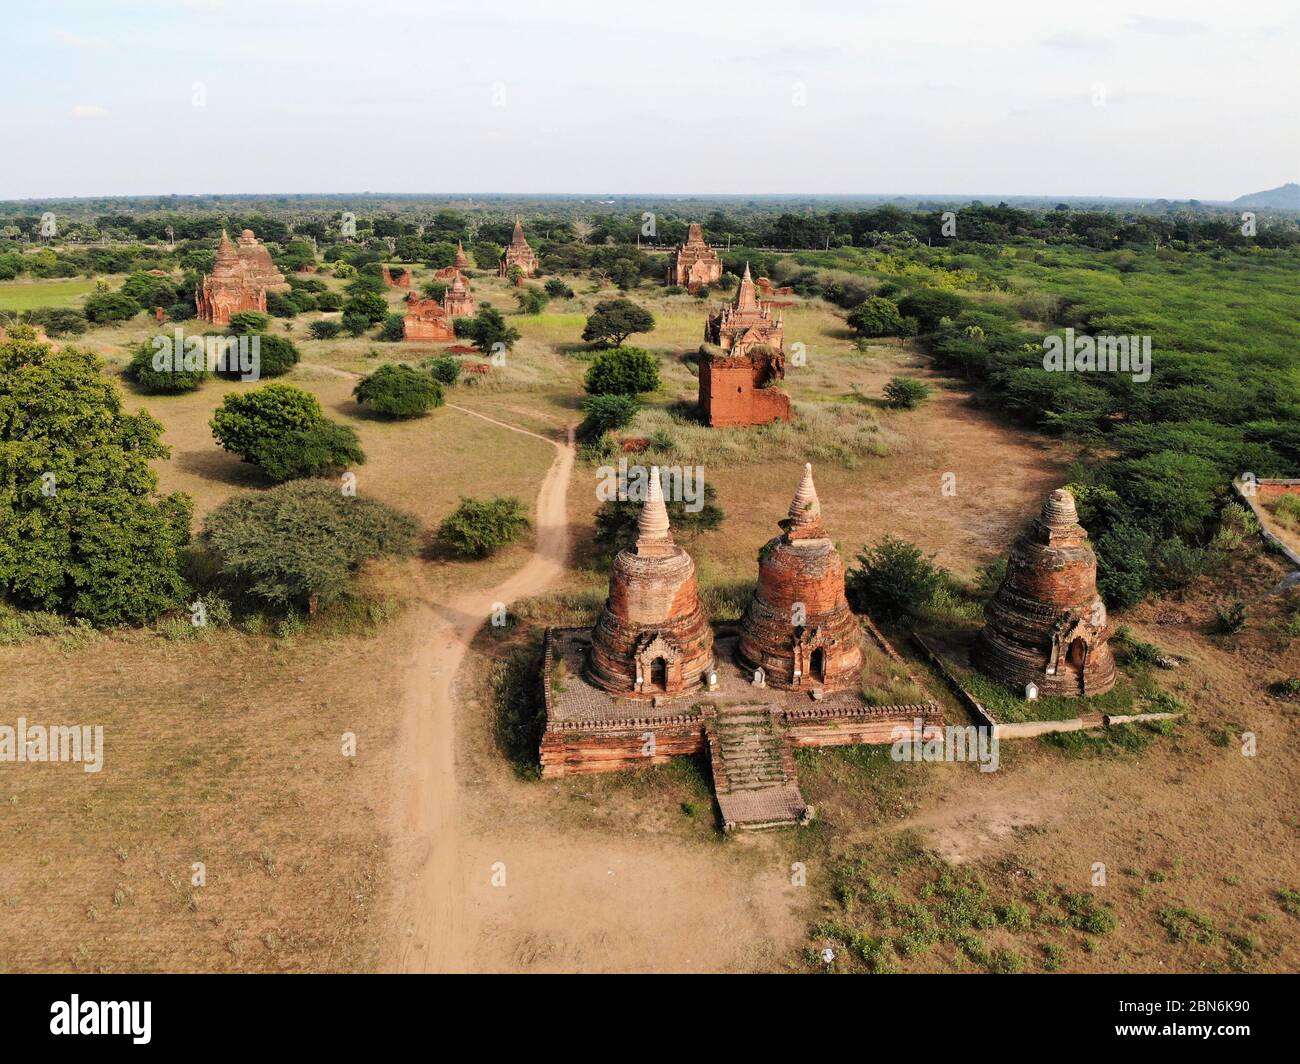 pagodas and stupas in Bagan, Myanmar, photo taken by drone Stock Photo